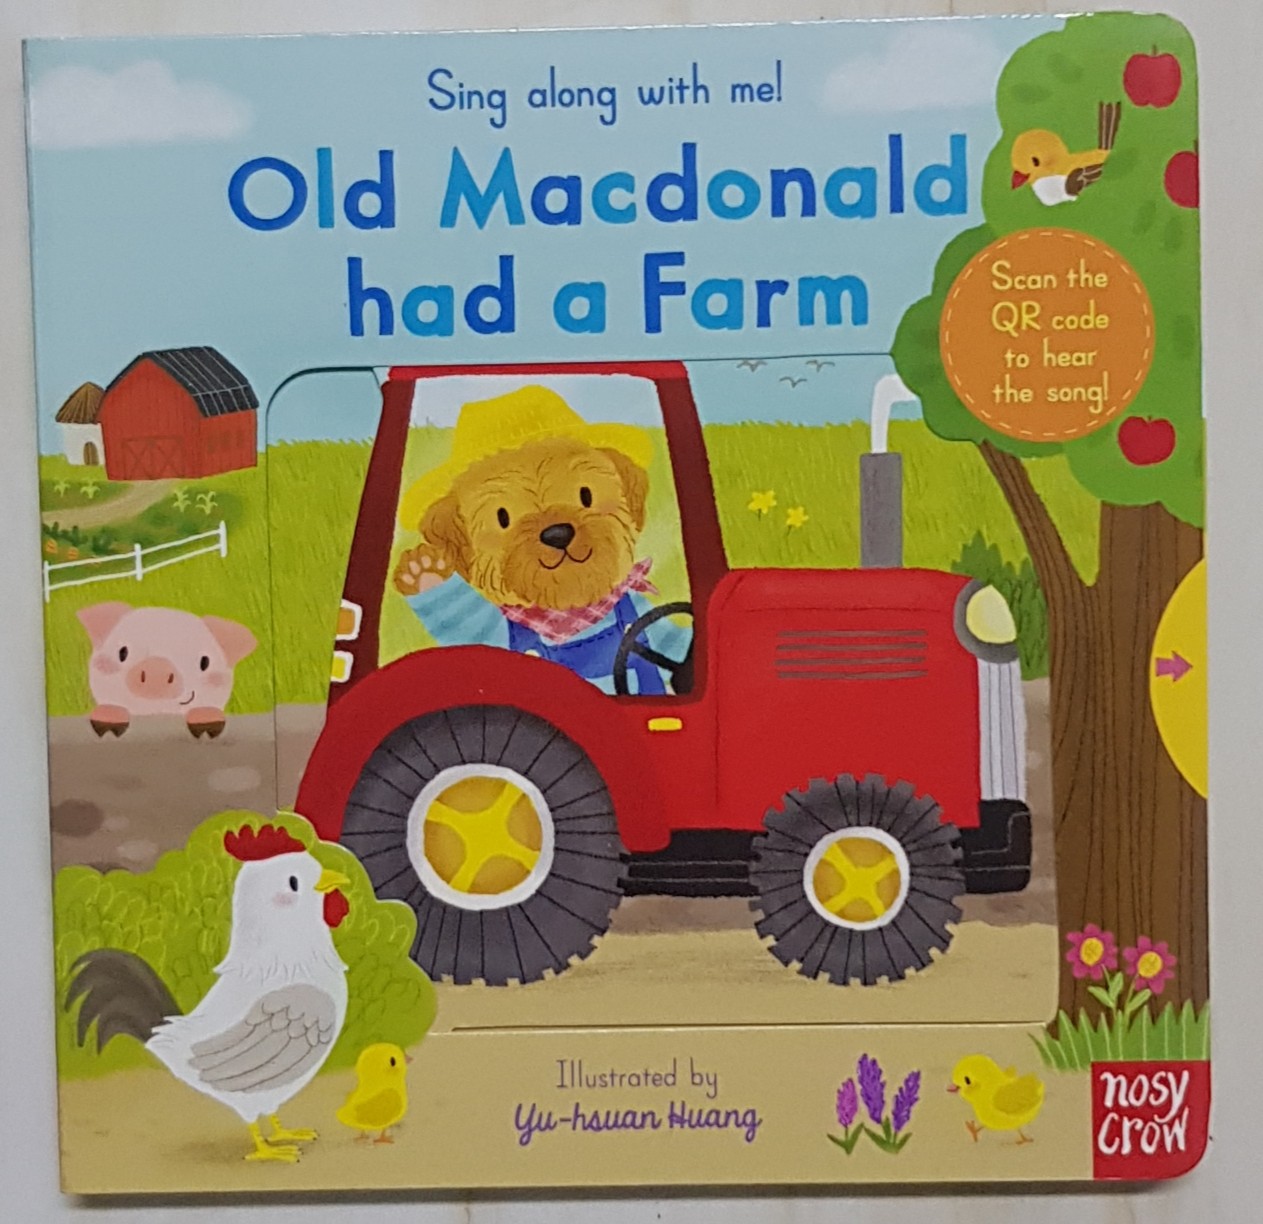 Sing Along With Me! Old Macdonald had a Farm Board book